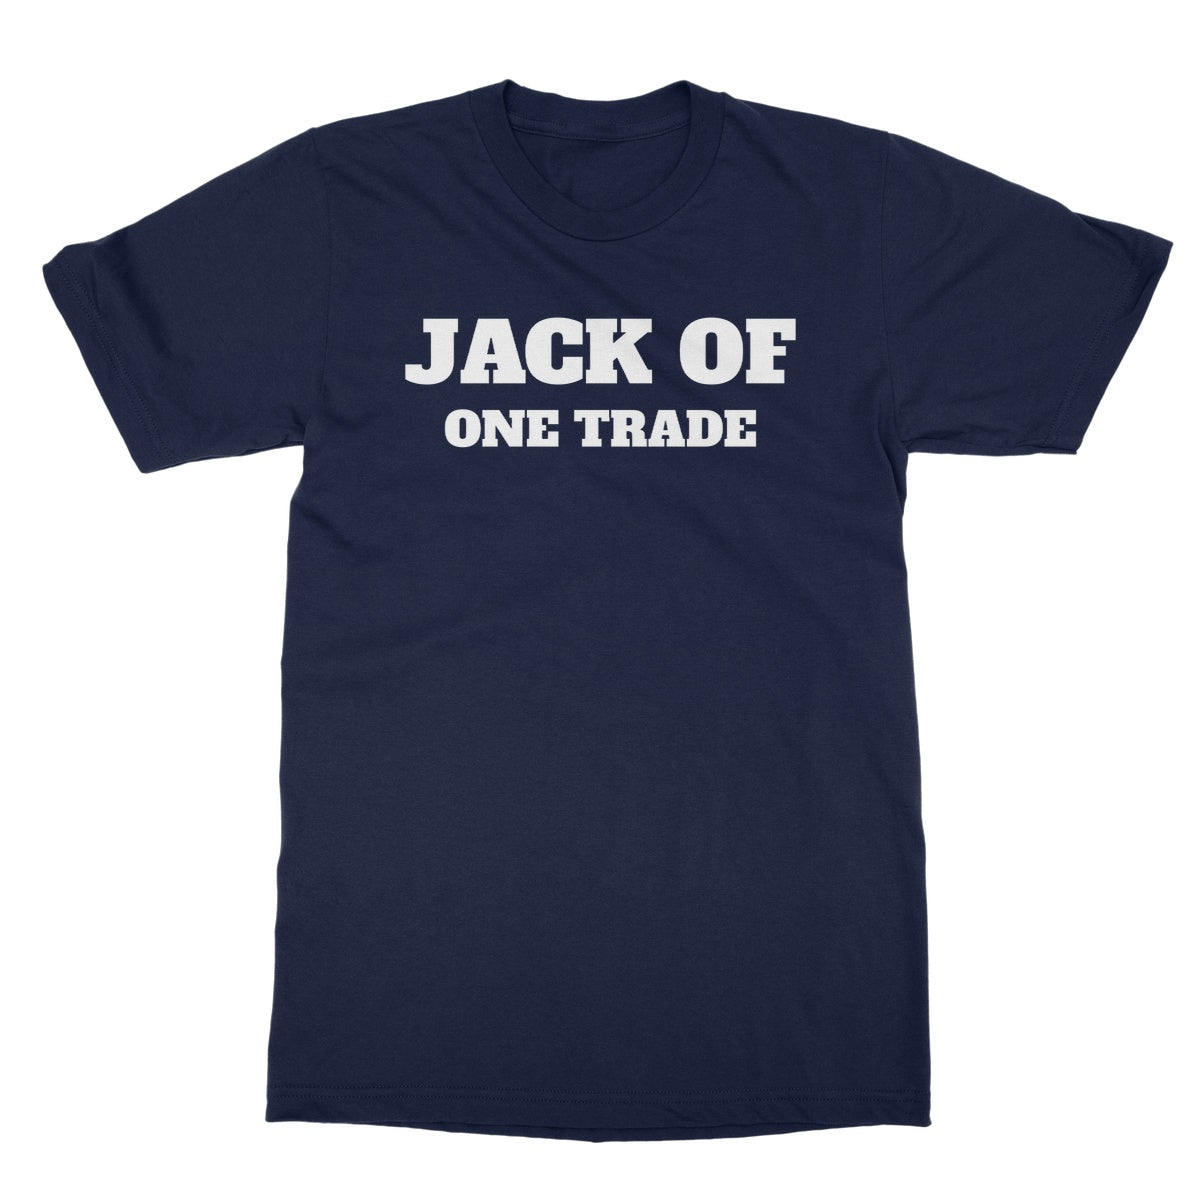 jack of one trade t shirt navy